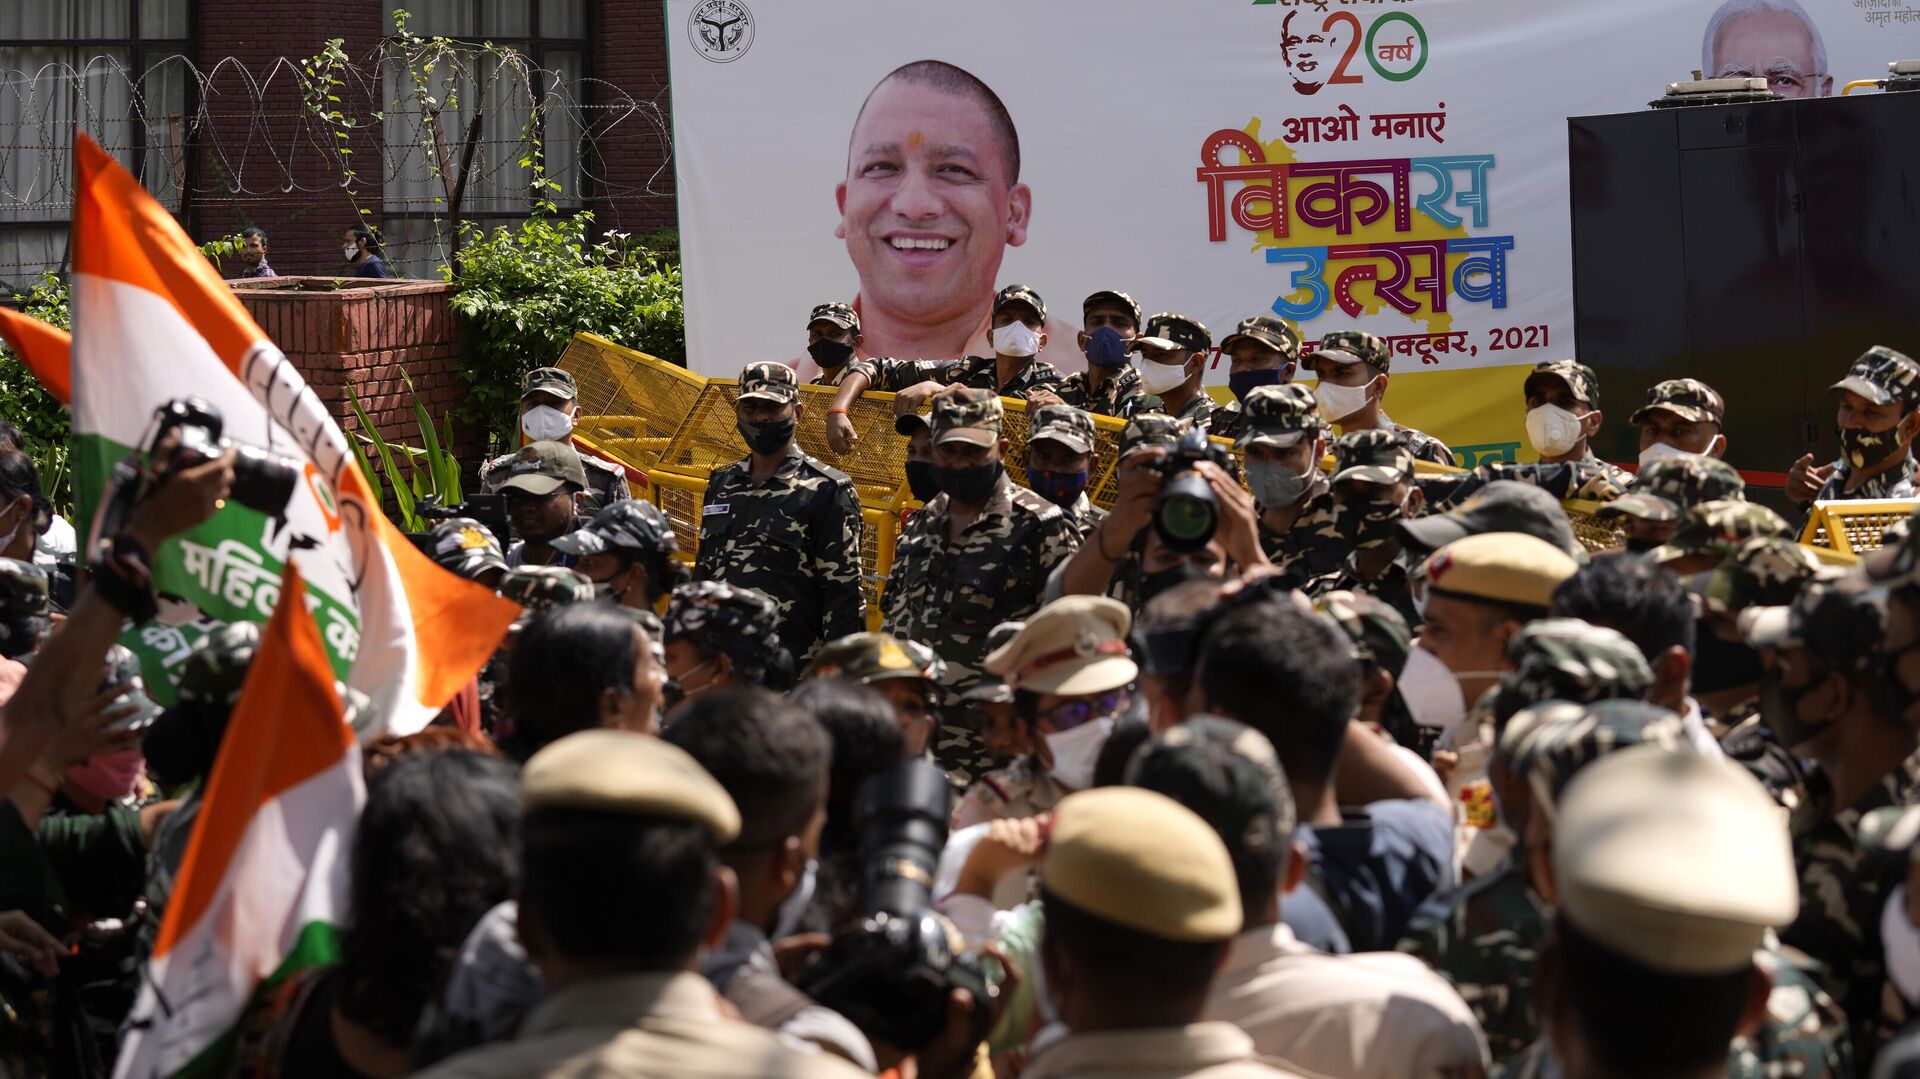 A banner of development festival displays a photograph of Uttar Pradesh Chief Minister Yogi Adityanath as paramilitary force soldiers detain activists of Congress party's youth wing protesting against Sunday's killing of four farmers in Uttar Pradesh state after being run over by a car owned by India's junior home minister in New Delhi, India, Monday, Oct. 4, 2021. - Sputnik India, 1920, 19.01.2023